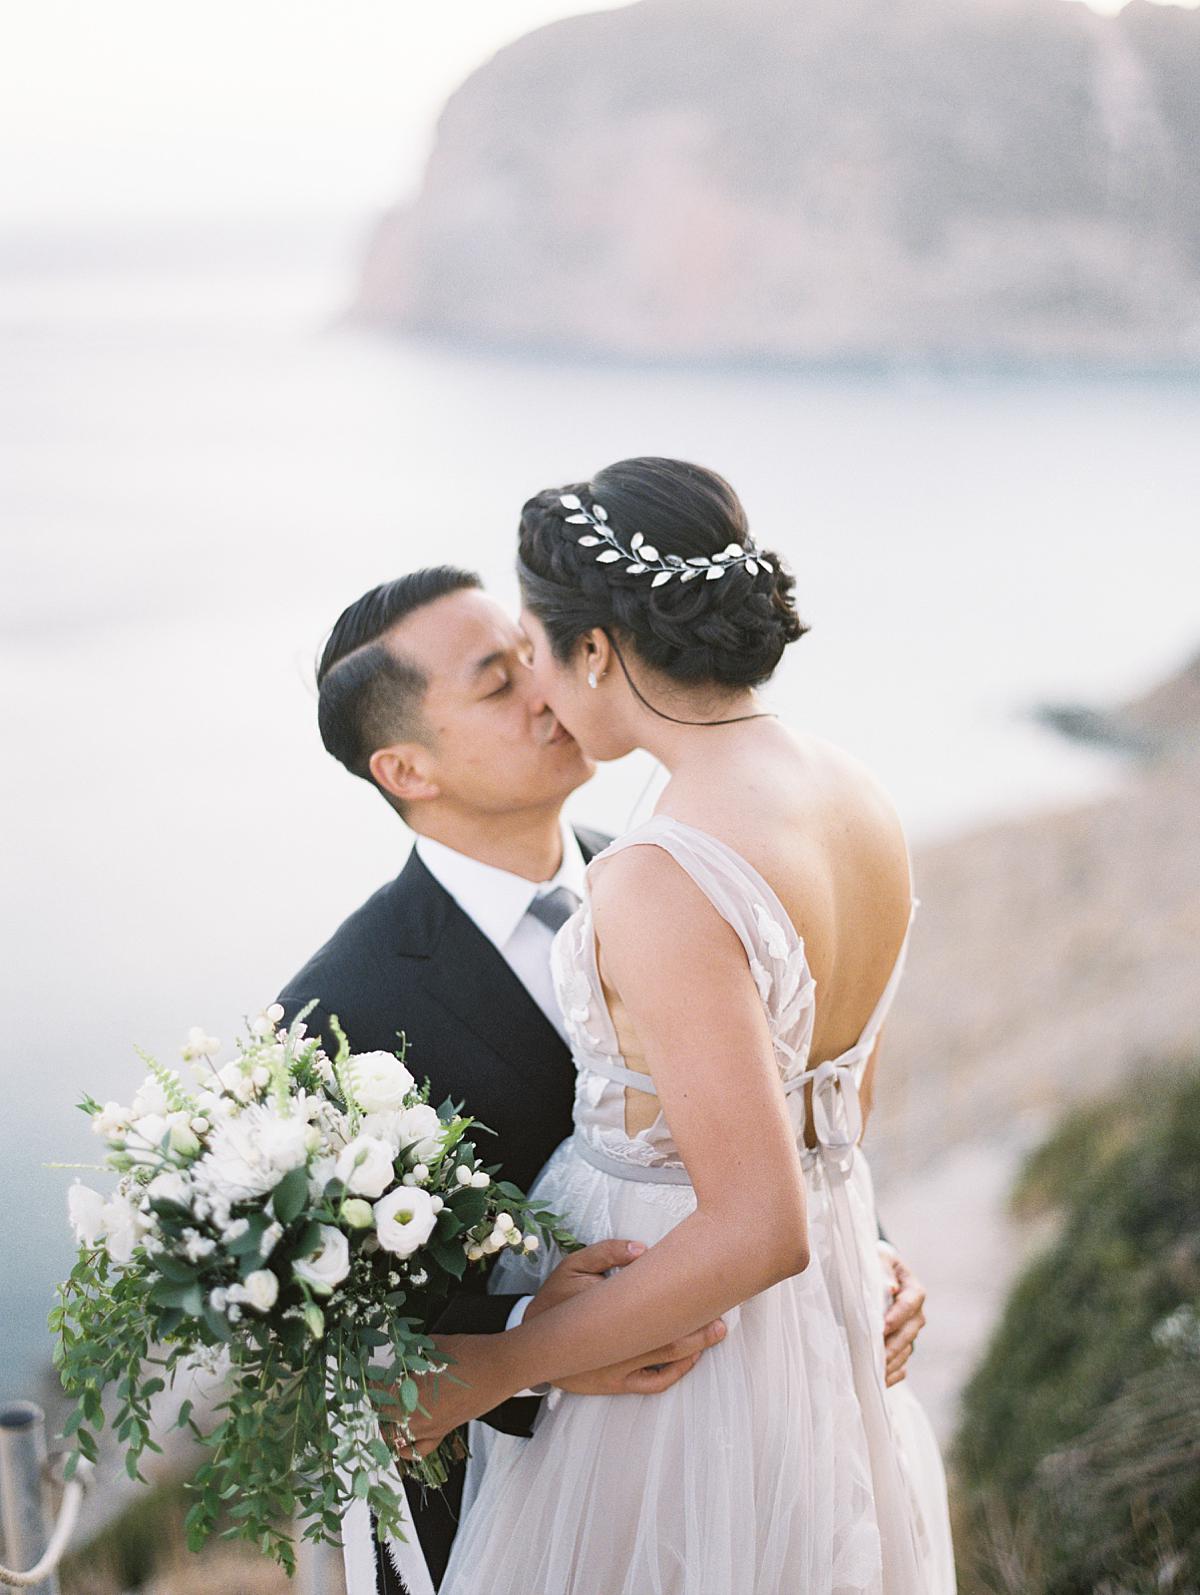 Bride and Groom kissing each other at Milos wedding in Greece